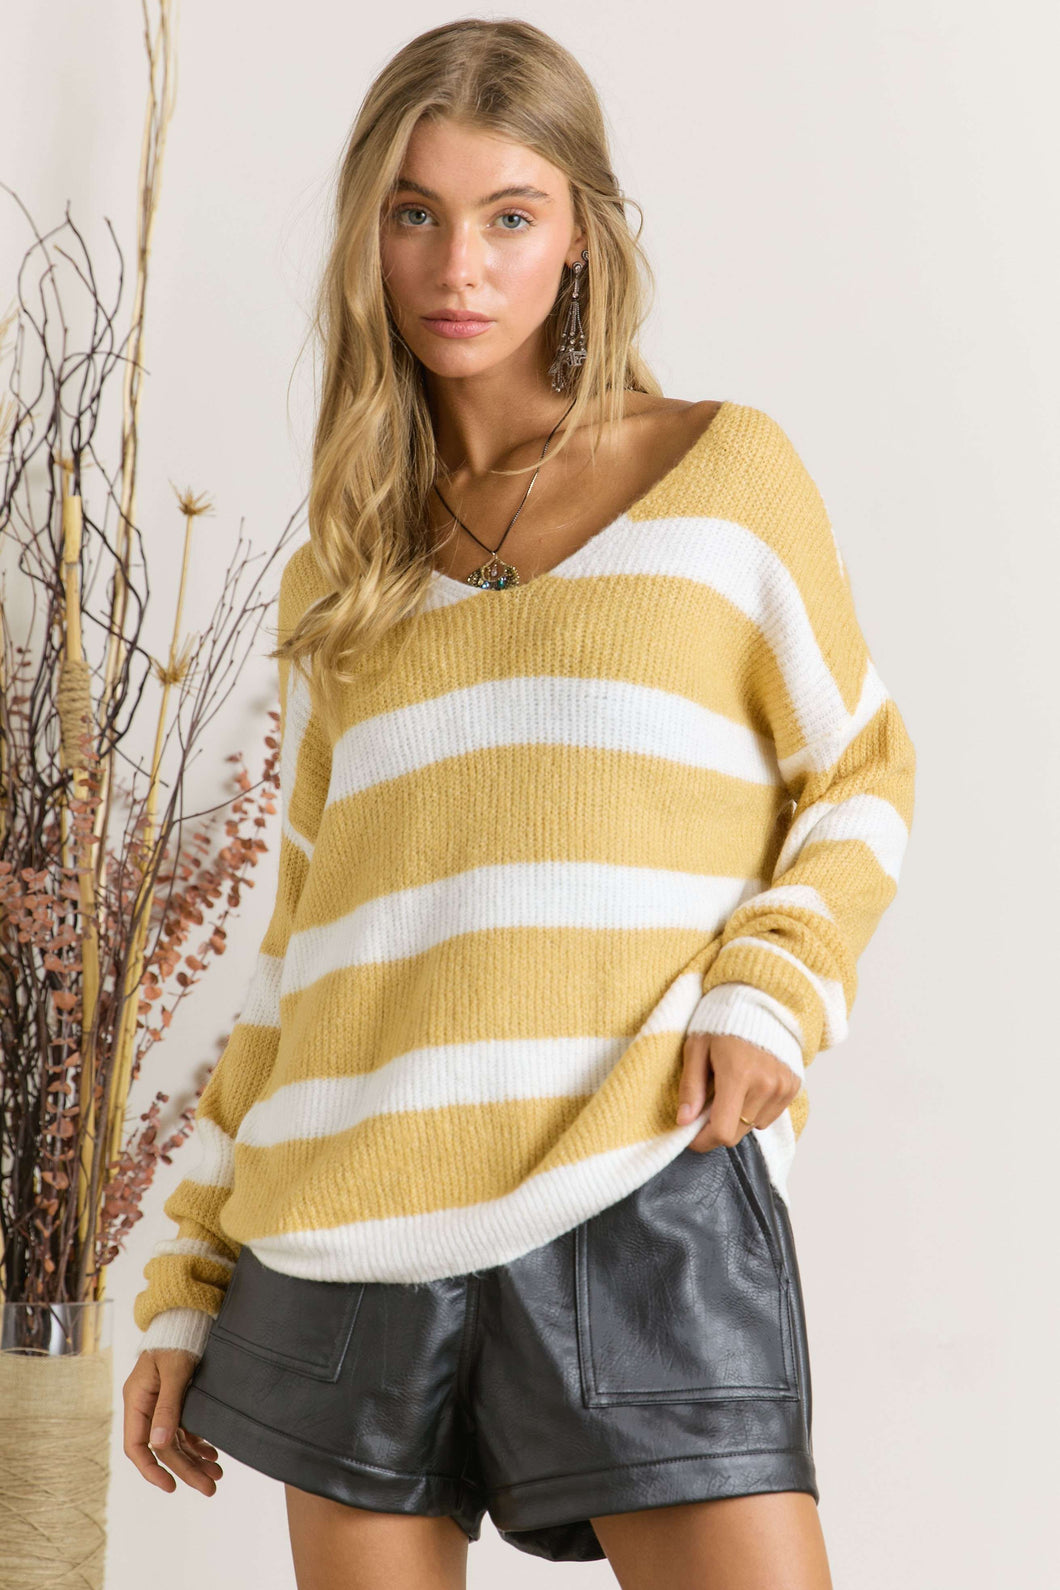 Striped Comfy Sweater Top